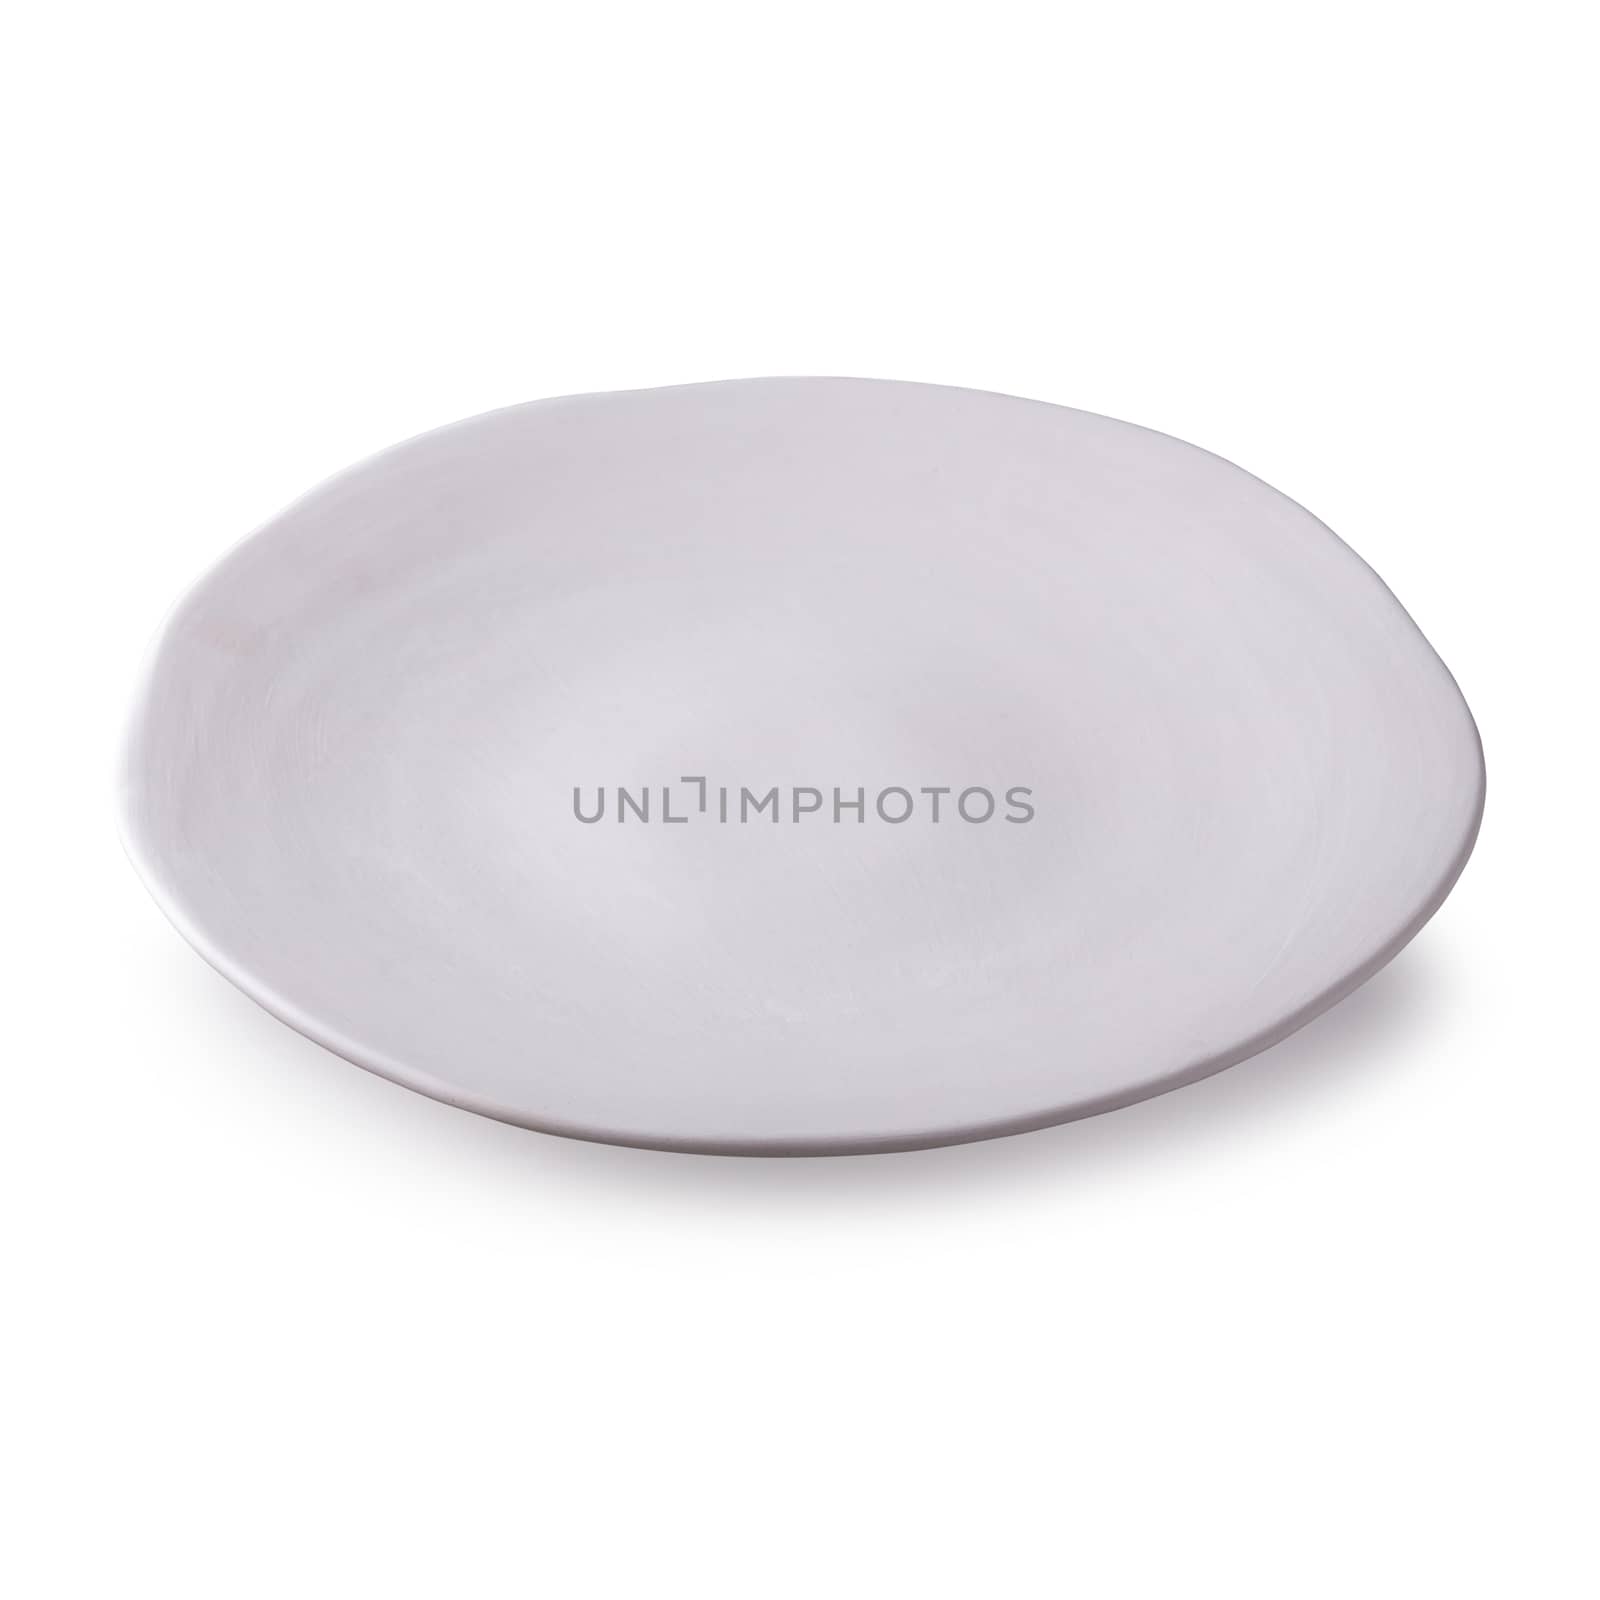 Empty blank white ceramic dish isolated on a white background.